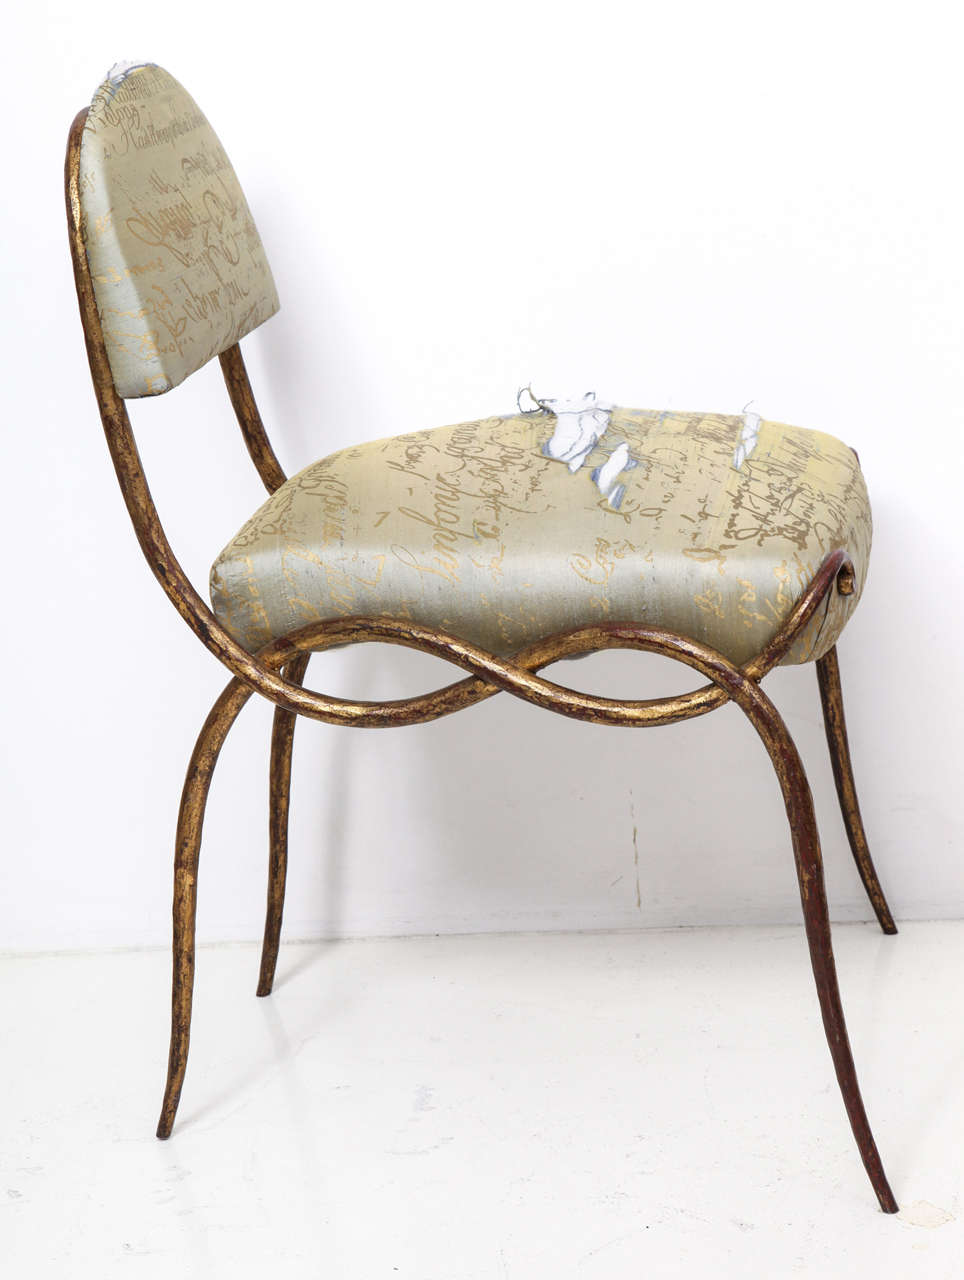 René Drouet (1899–1993) 
Side chair in scrolling ironwork with gilded finish.
Low rounded back makes it a perfect vanity chair.
Requires reupholstery.
French,. c. 1940